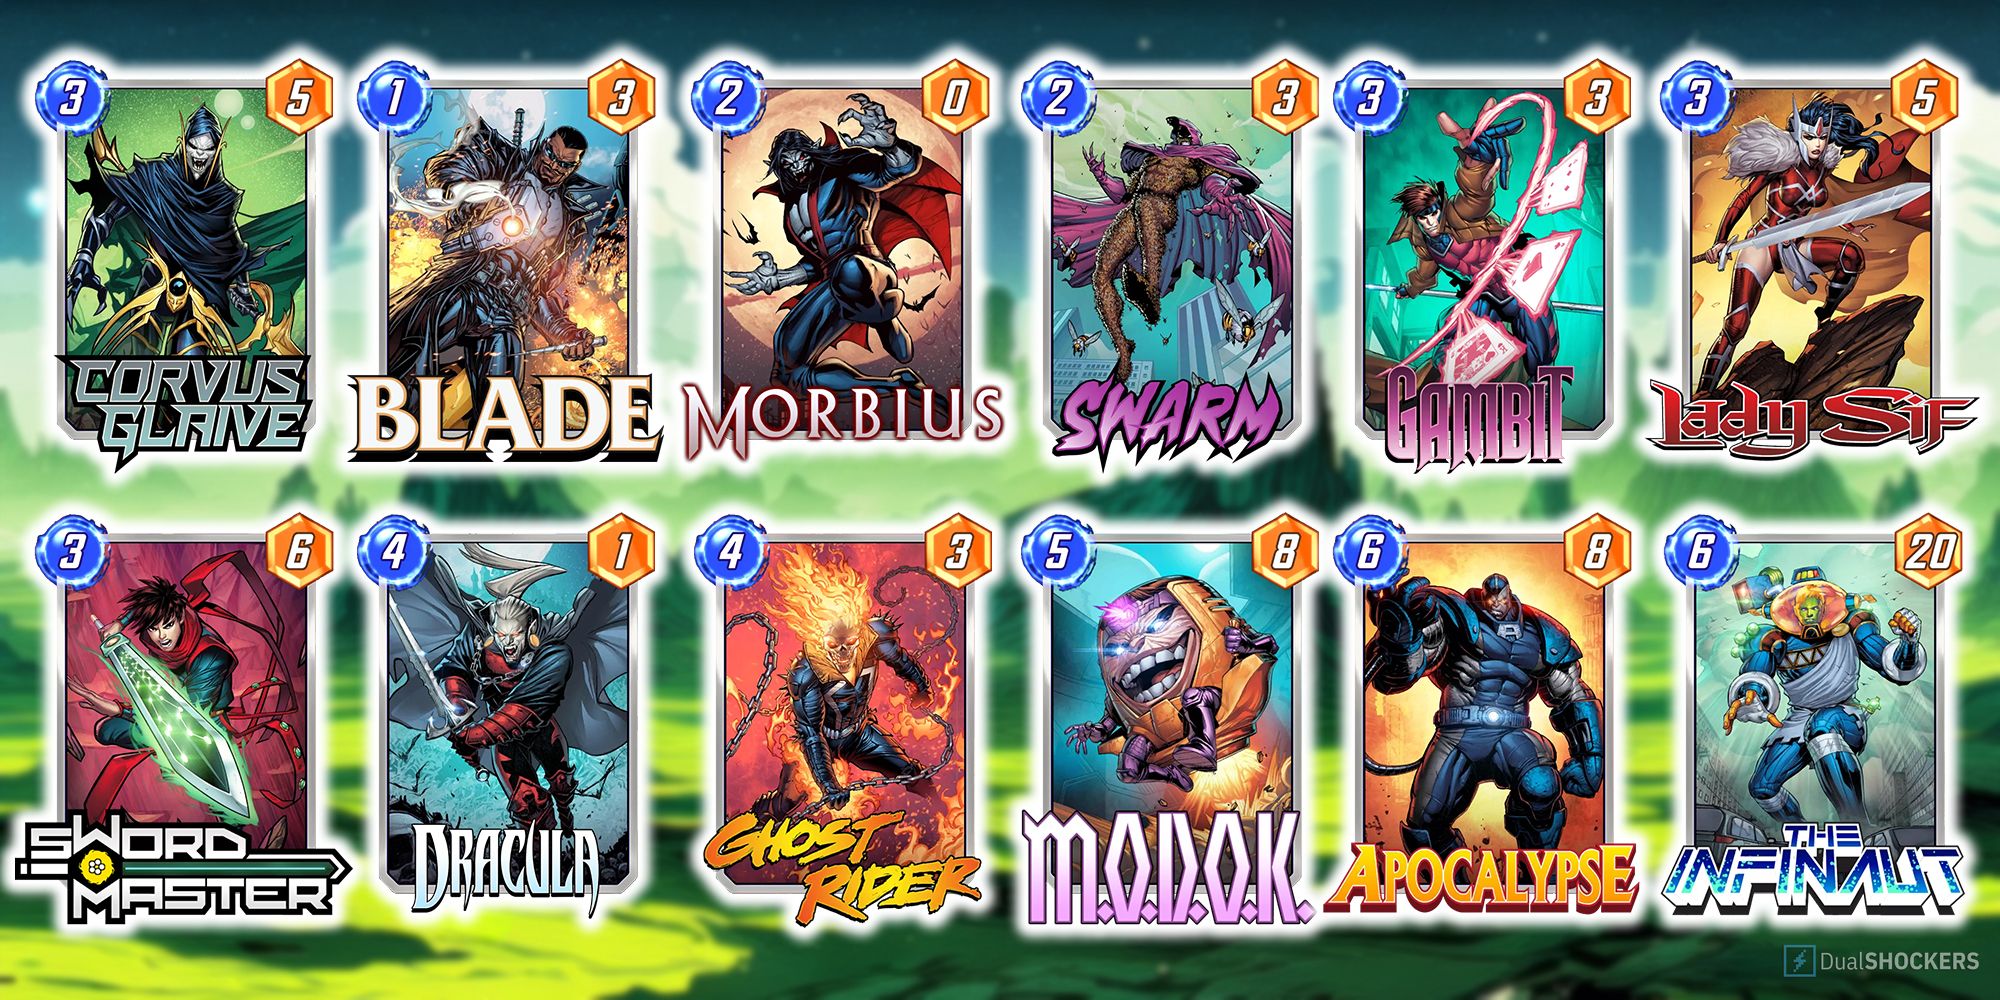 Marvel Snap deck comprised of Corvus Glaive, Blade, Morbius, Swarm, Gambit, Lady Sif, Sword Master, Dracula, Ghost Rider, M.O.D.O.K., Apocalypse, and Infinaut.